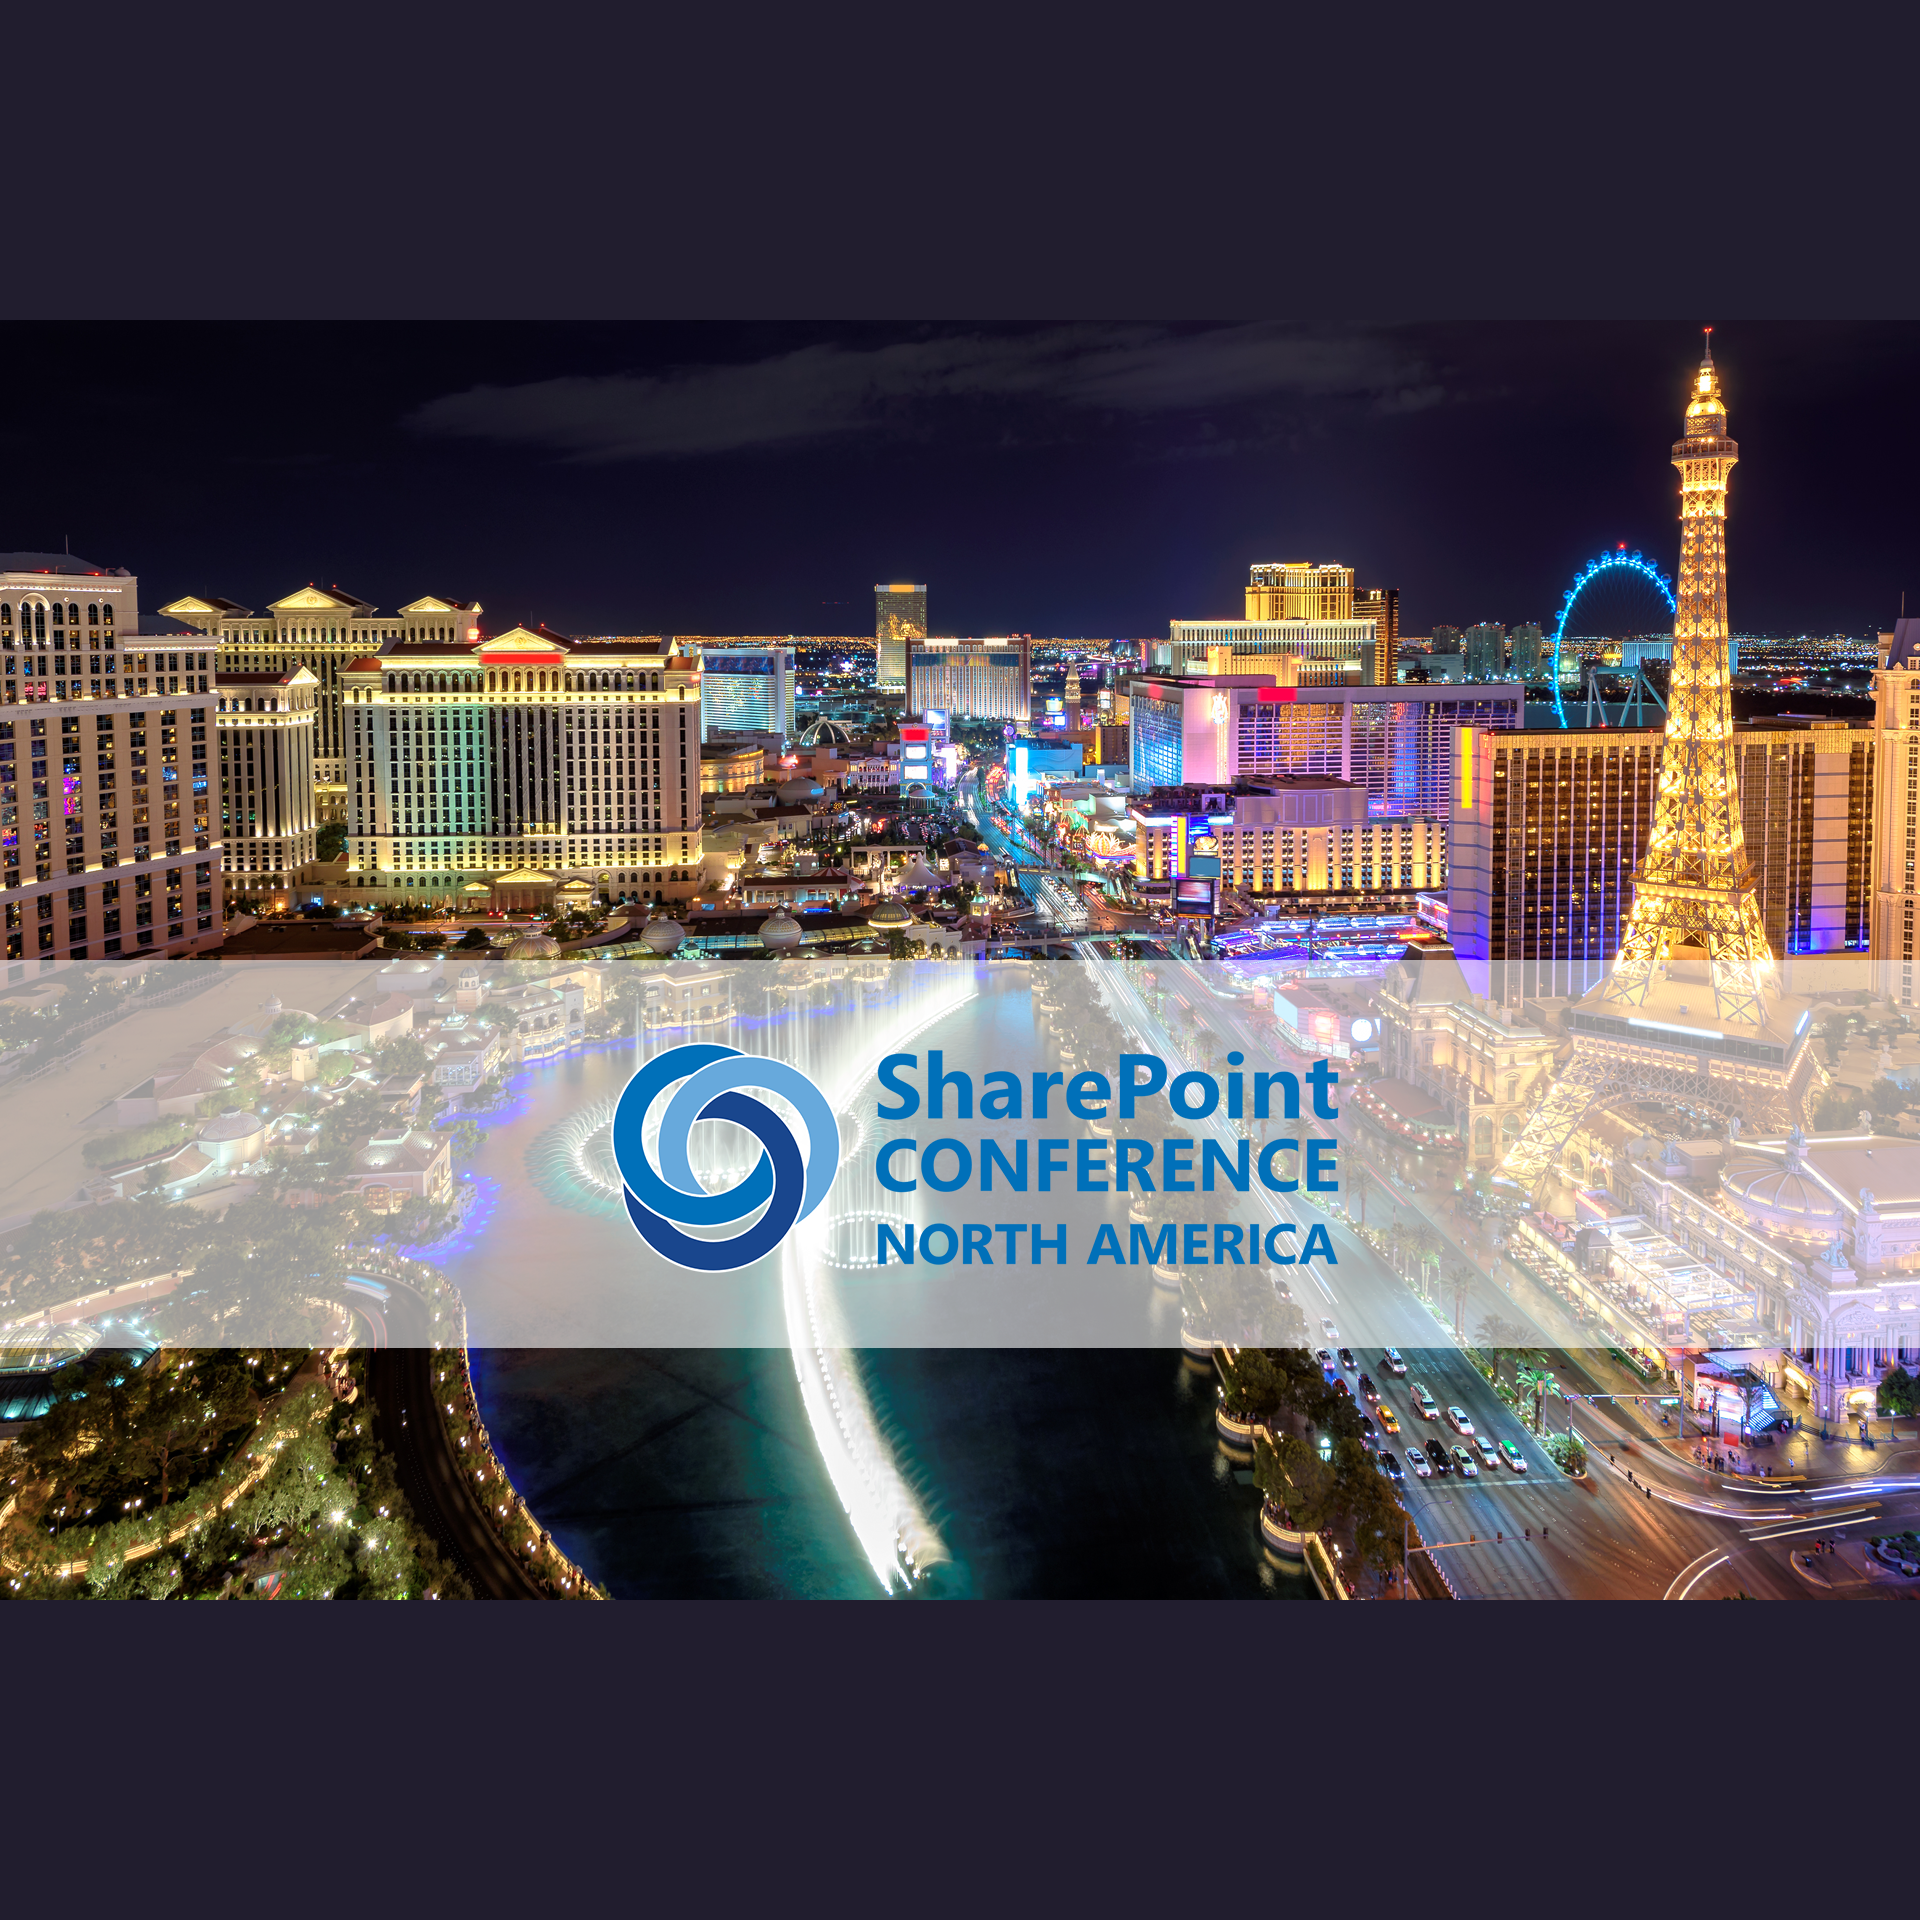 SharePoint Conference North America 2018 Announcements and Articles